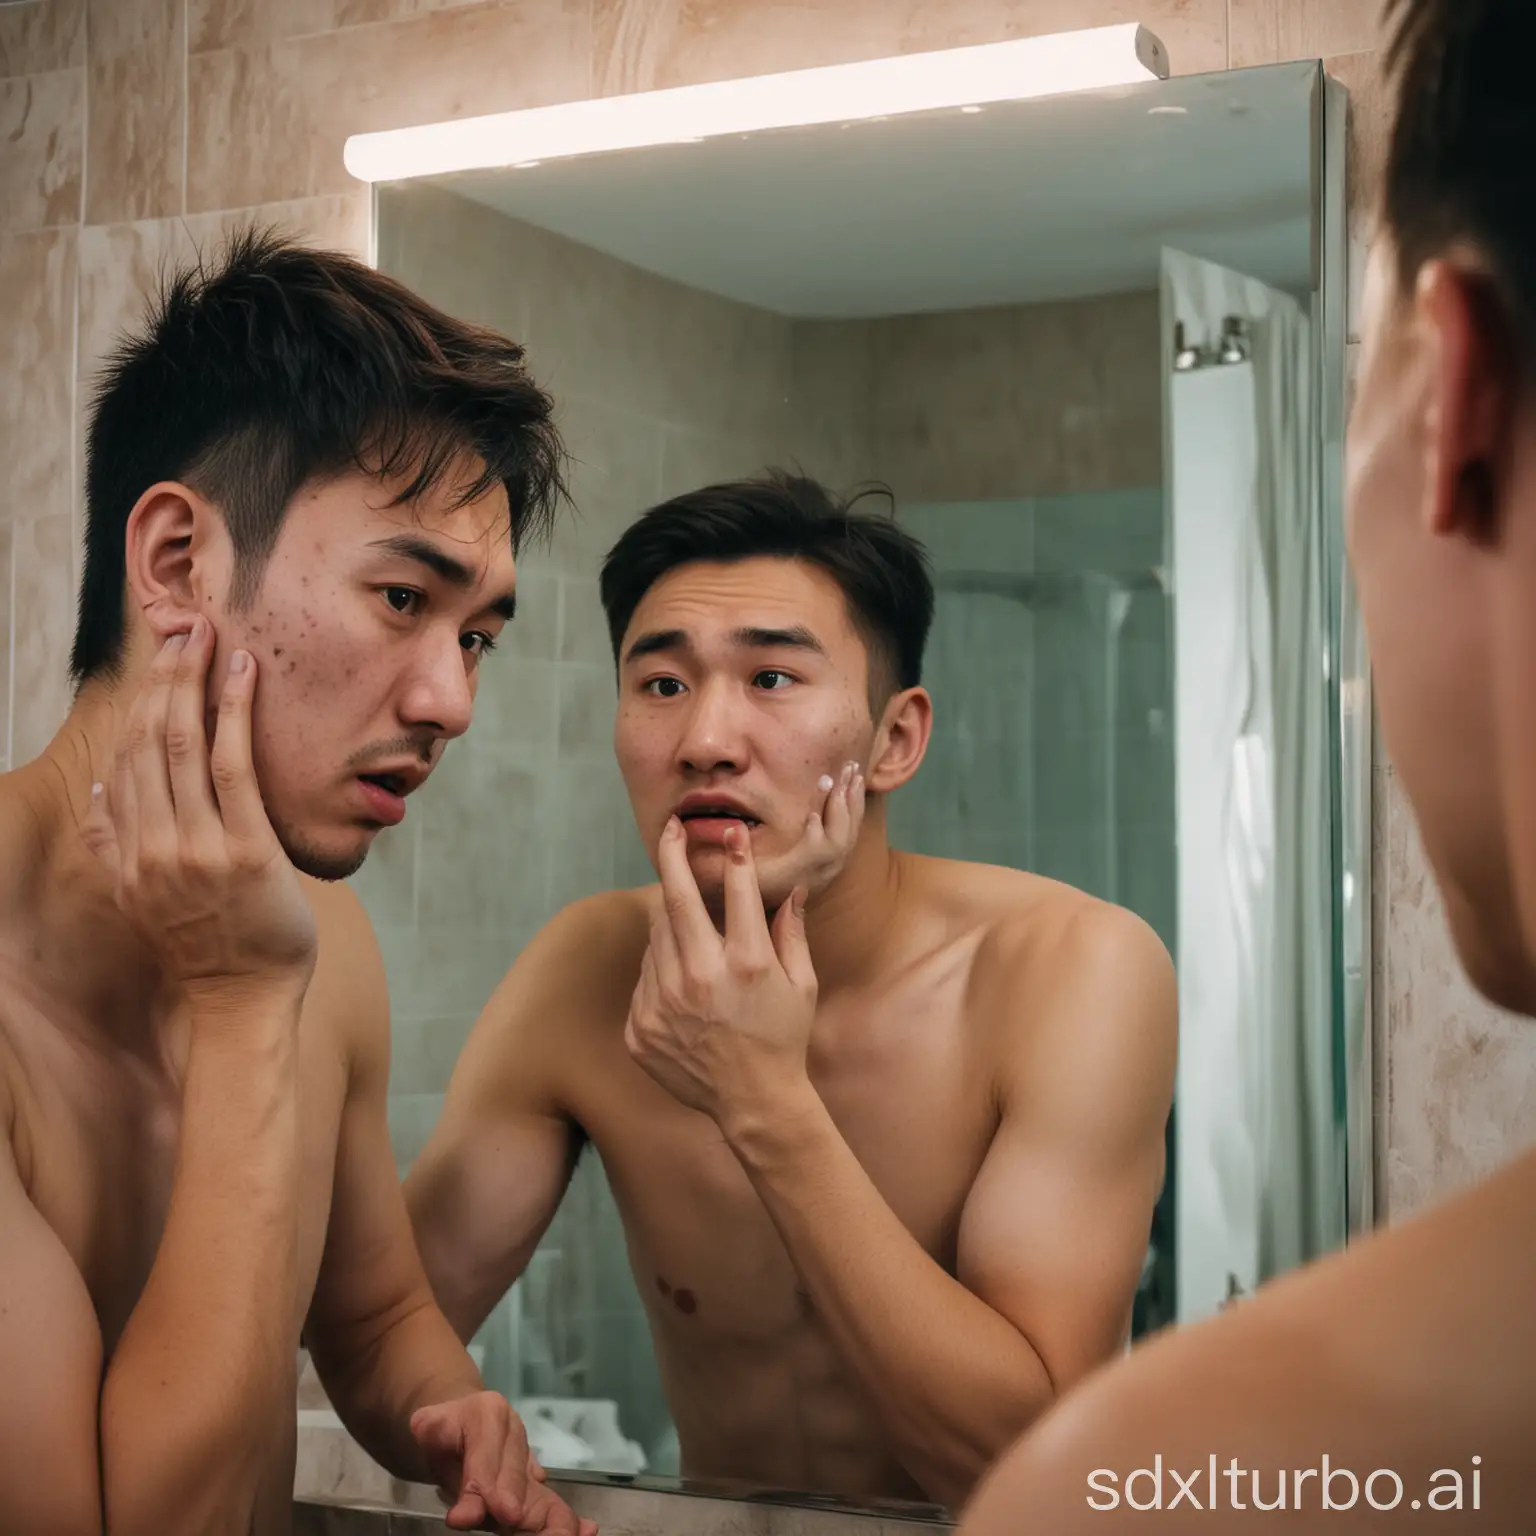 A Kazakh man is looking in the mirror. He is worried about having a lot of acne.